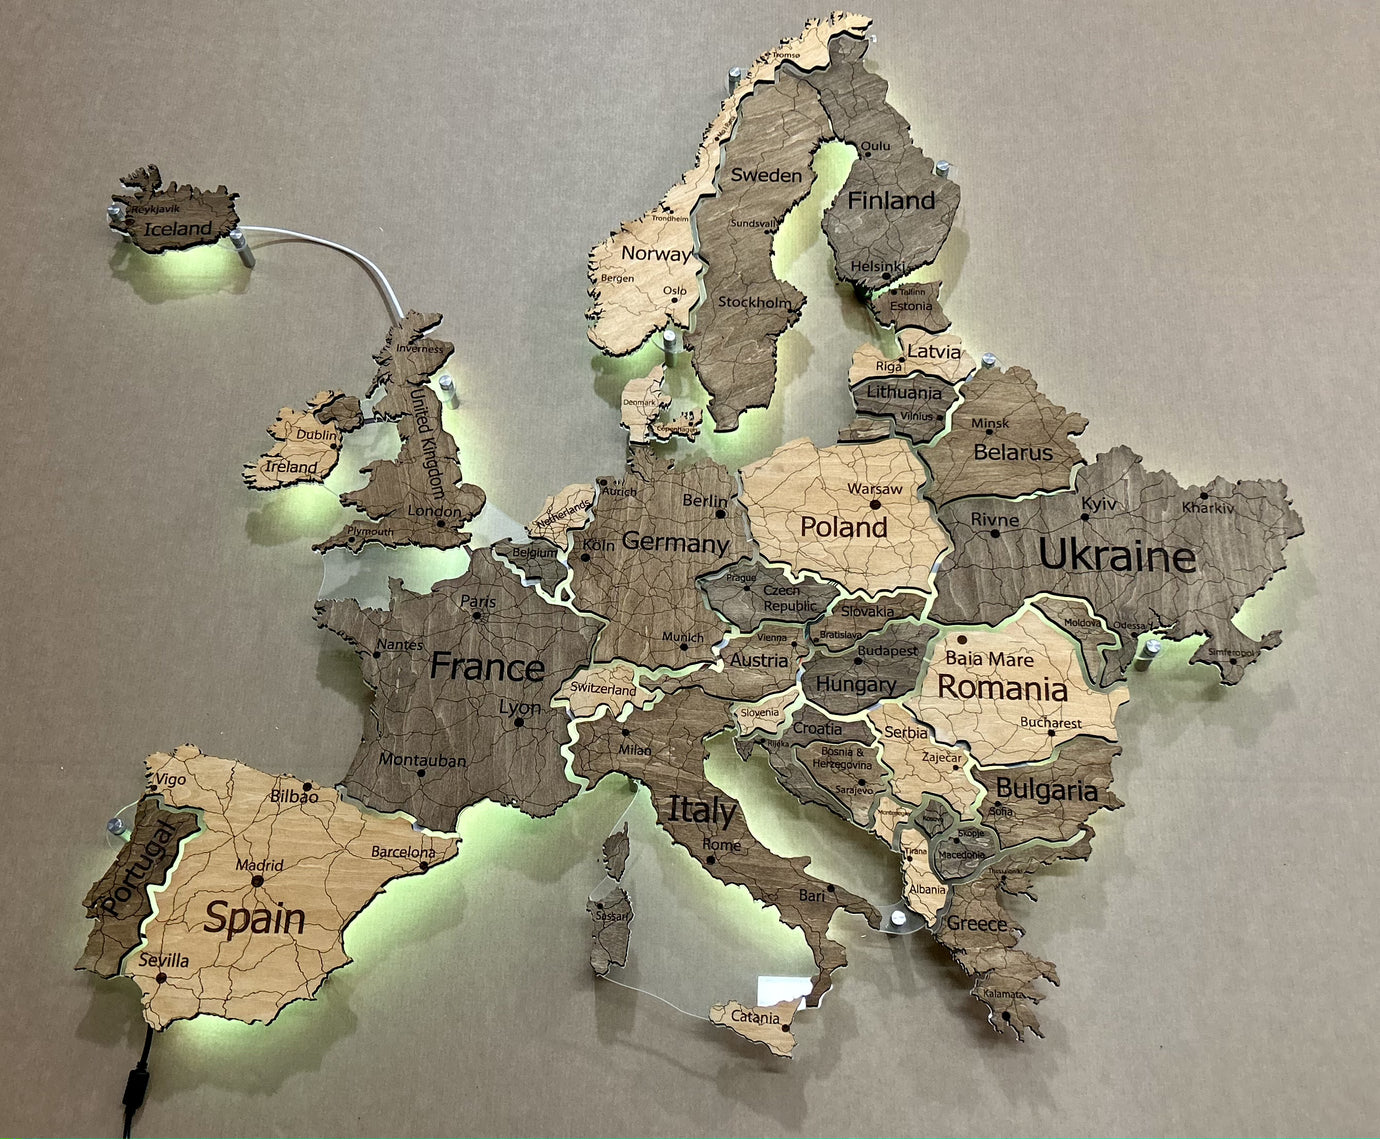 Europe LED RGB map on acrylic glass with backlighting between countries color Nobel